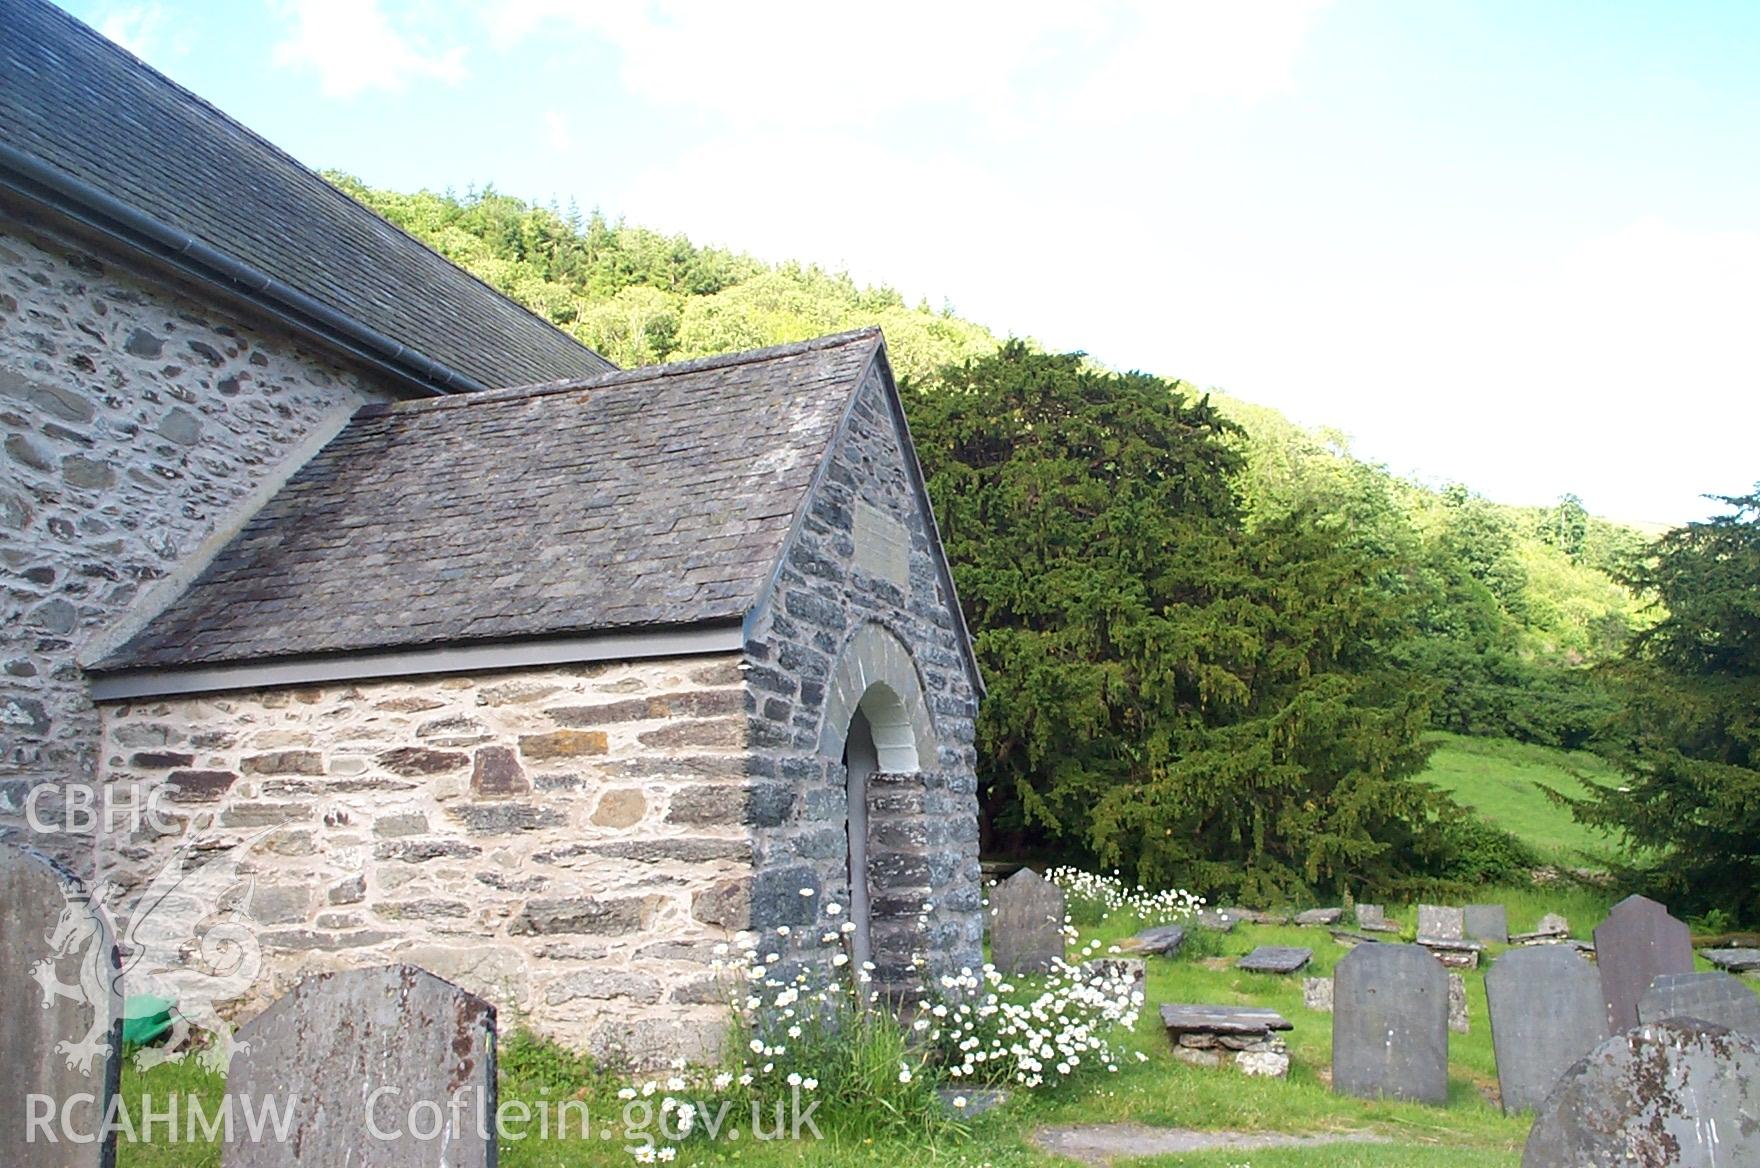 Digital photograph of St Melangell' S Church taken on 12/06/2003 by Oxford Archaeology North during the Dyffryn Tanat Upland Survey